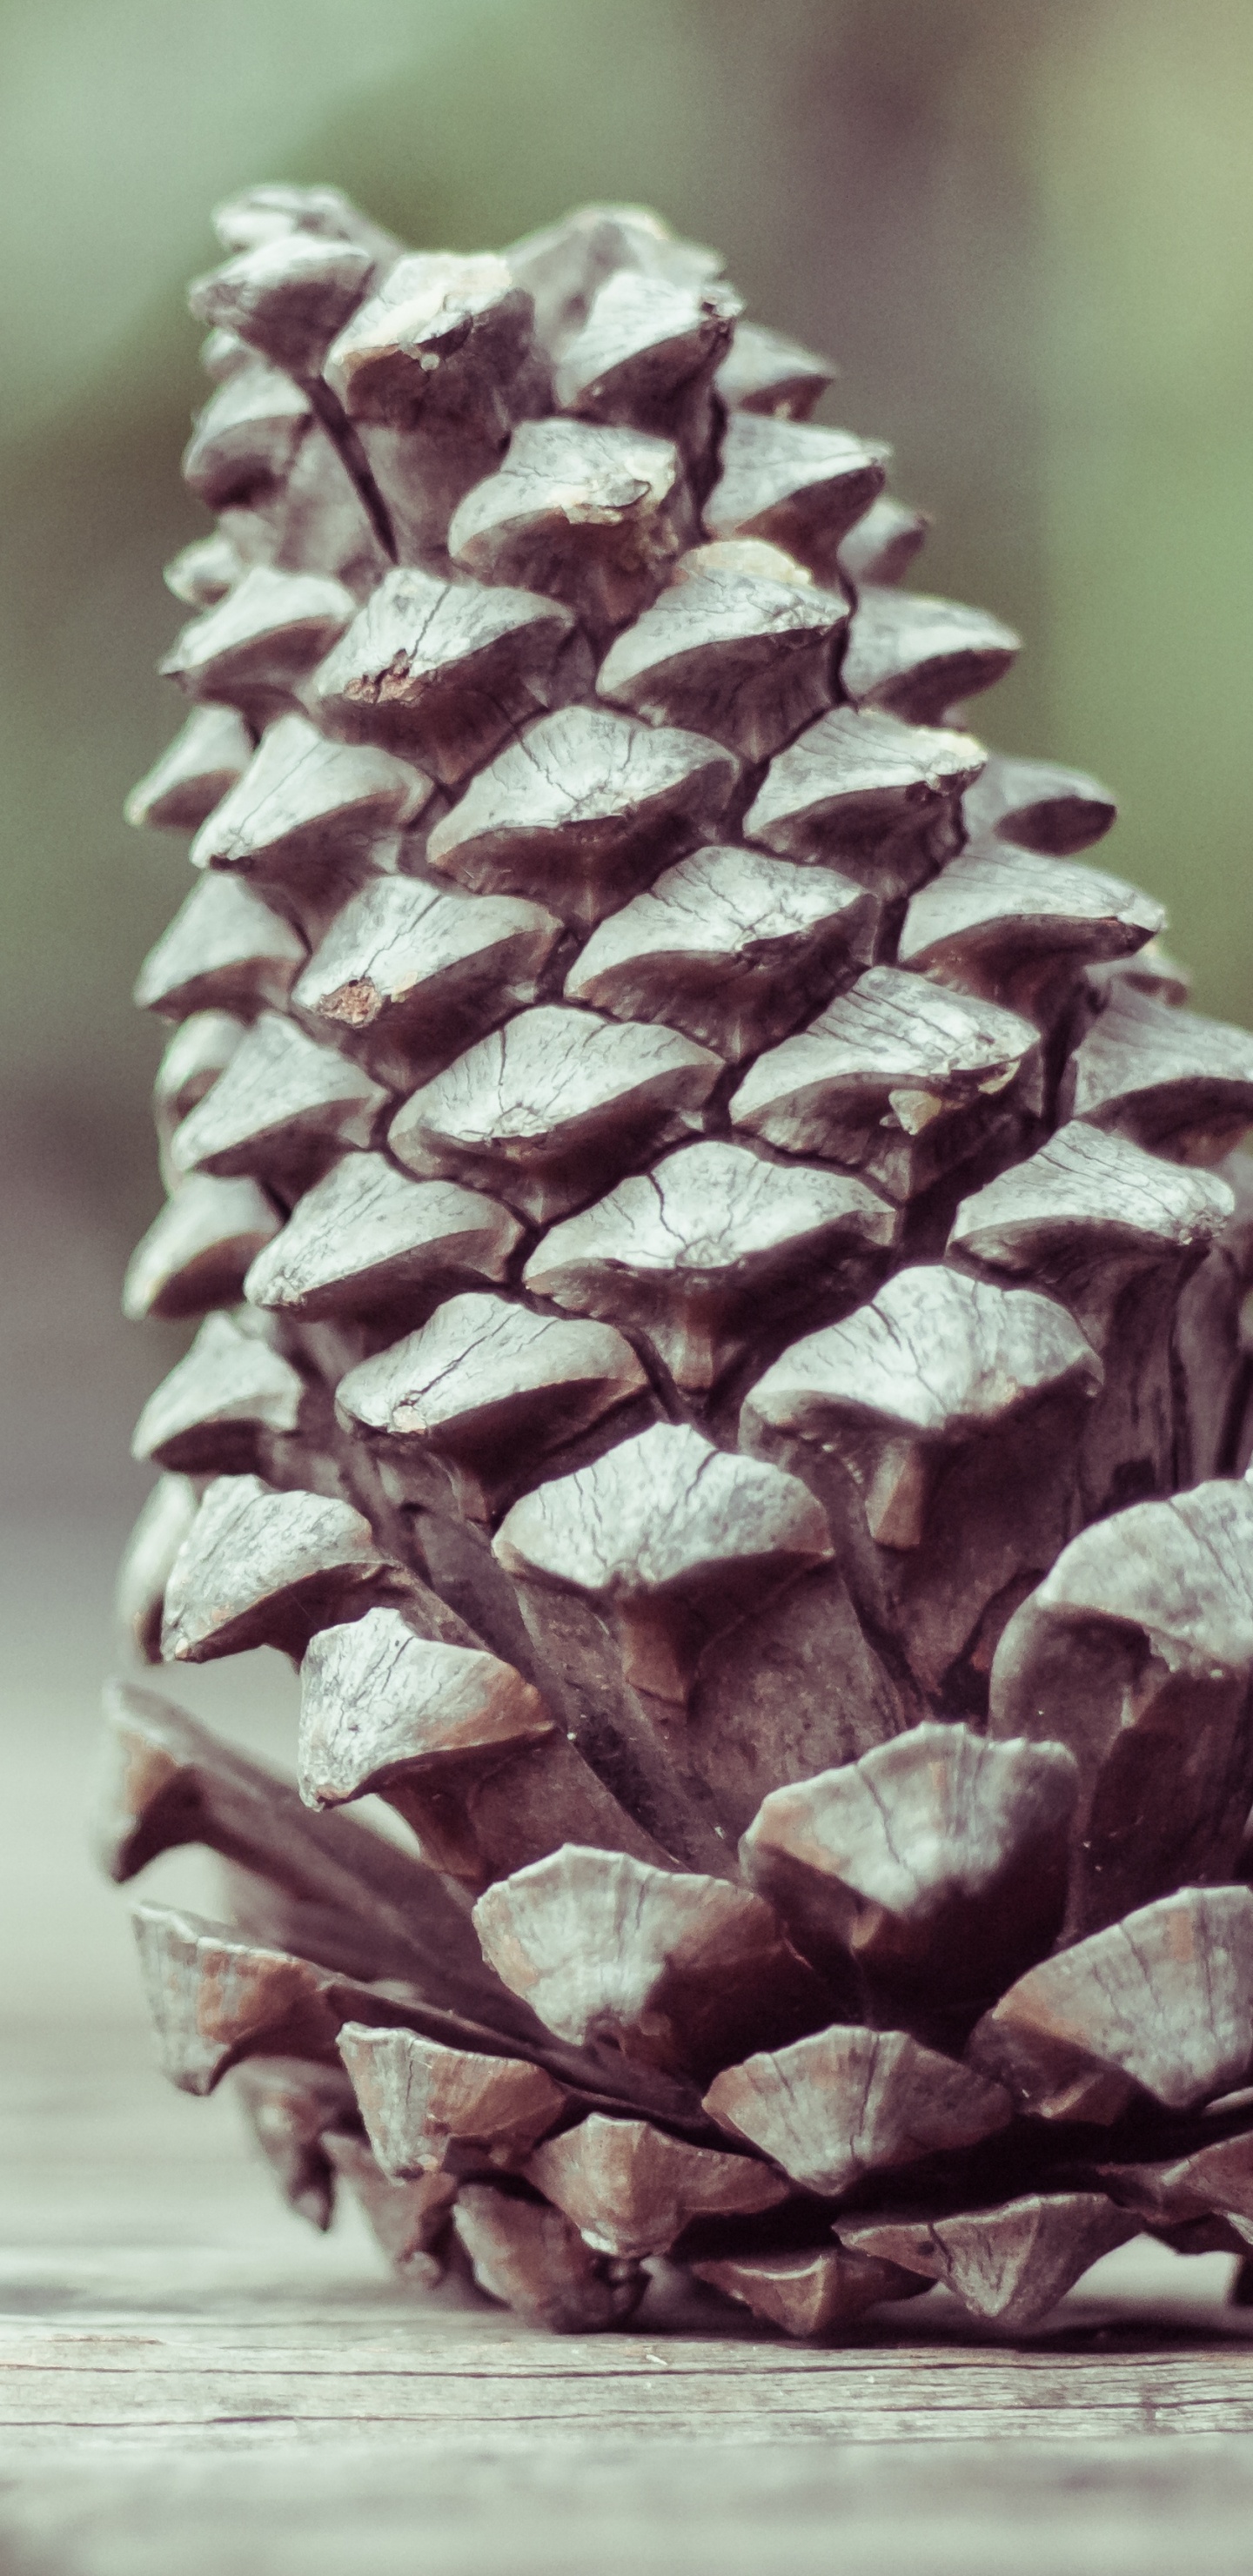 Brown Pine Cone on Brown Wooden Table. Wallpaper in 1440x2960 Resolution